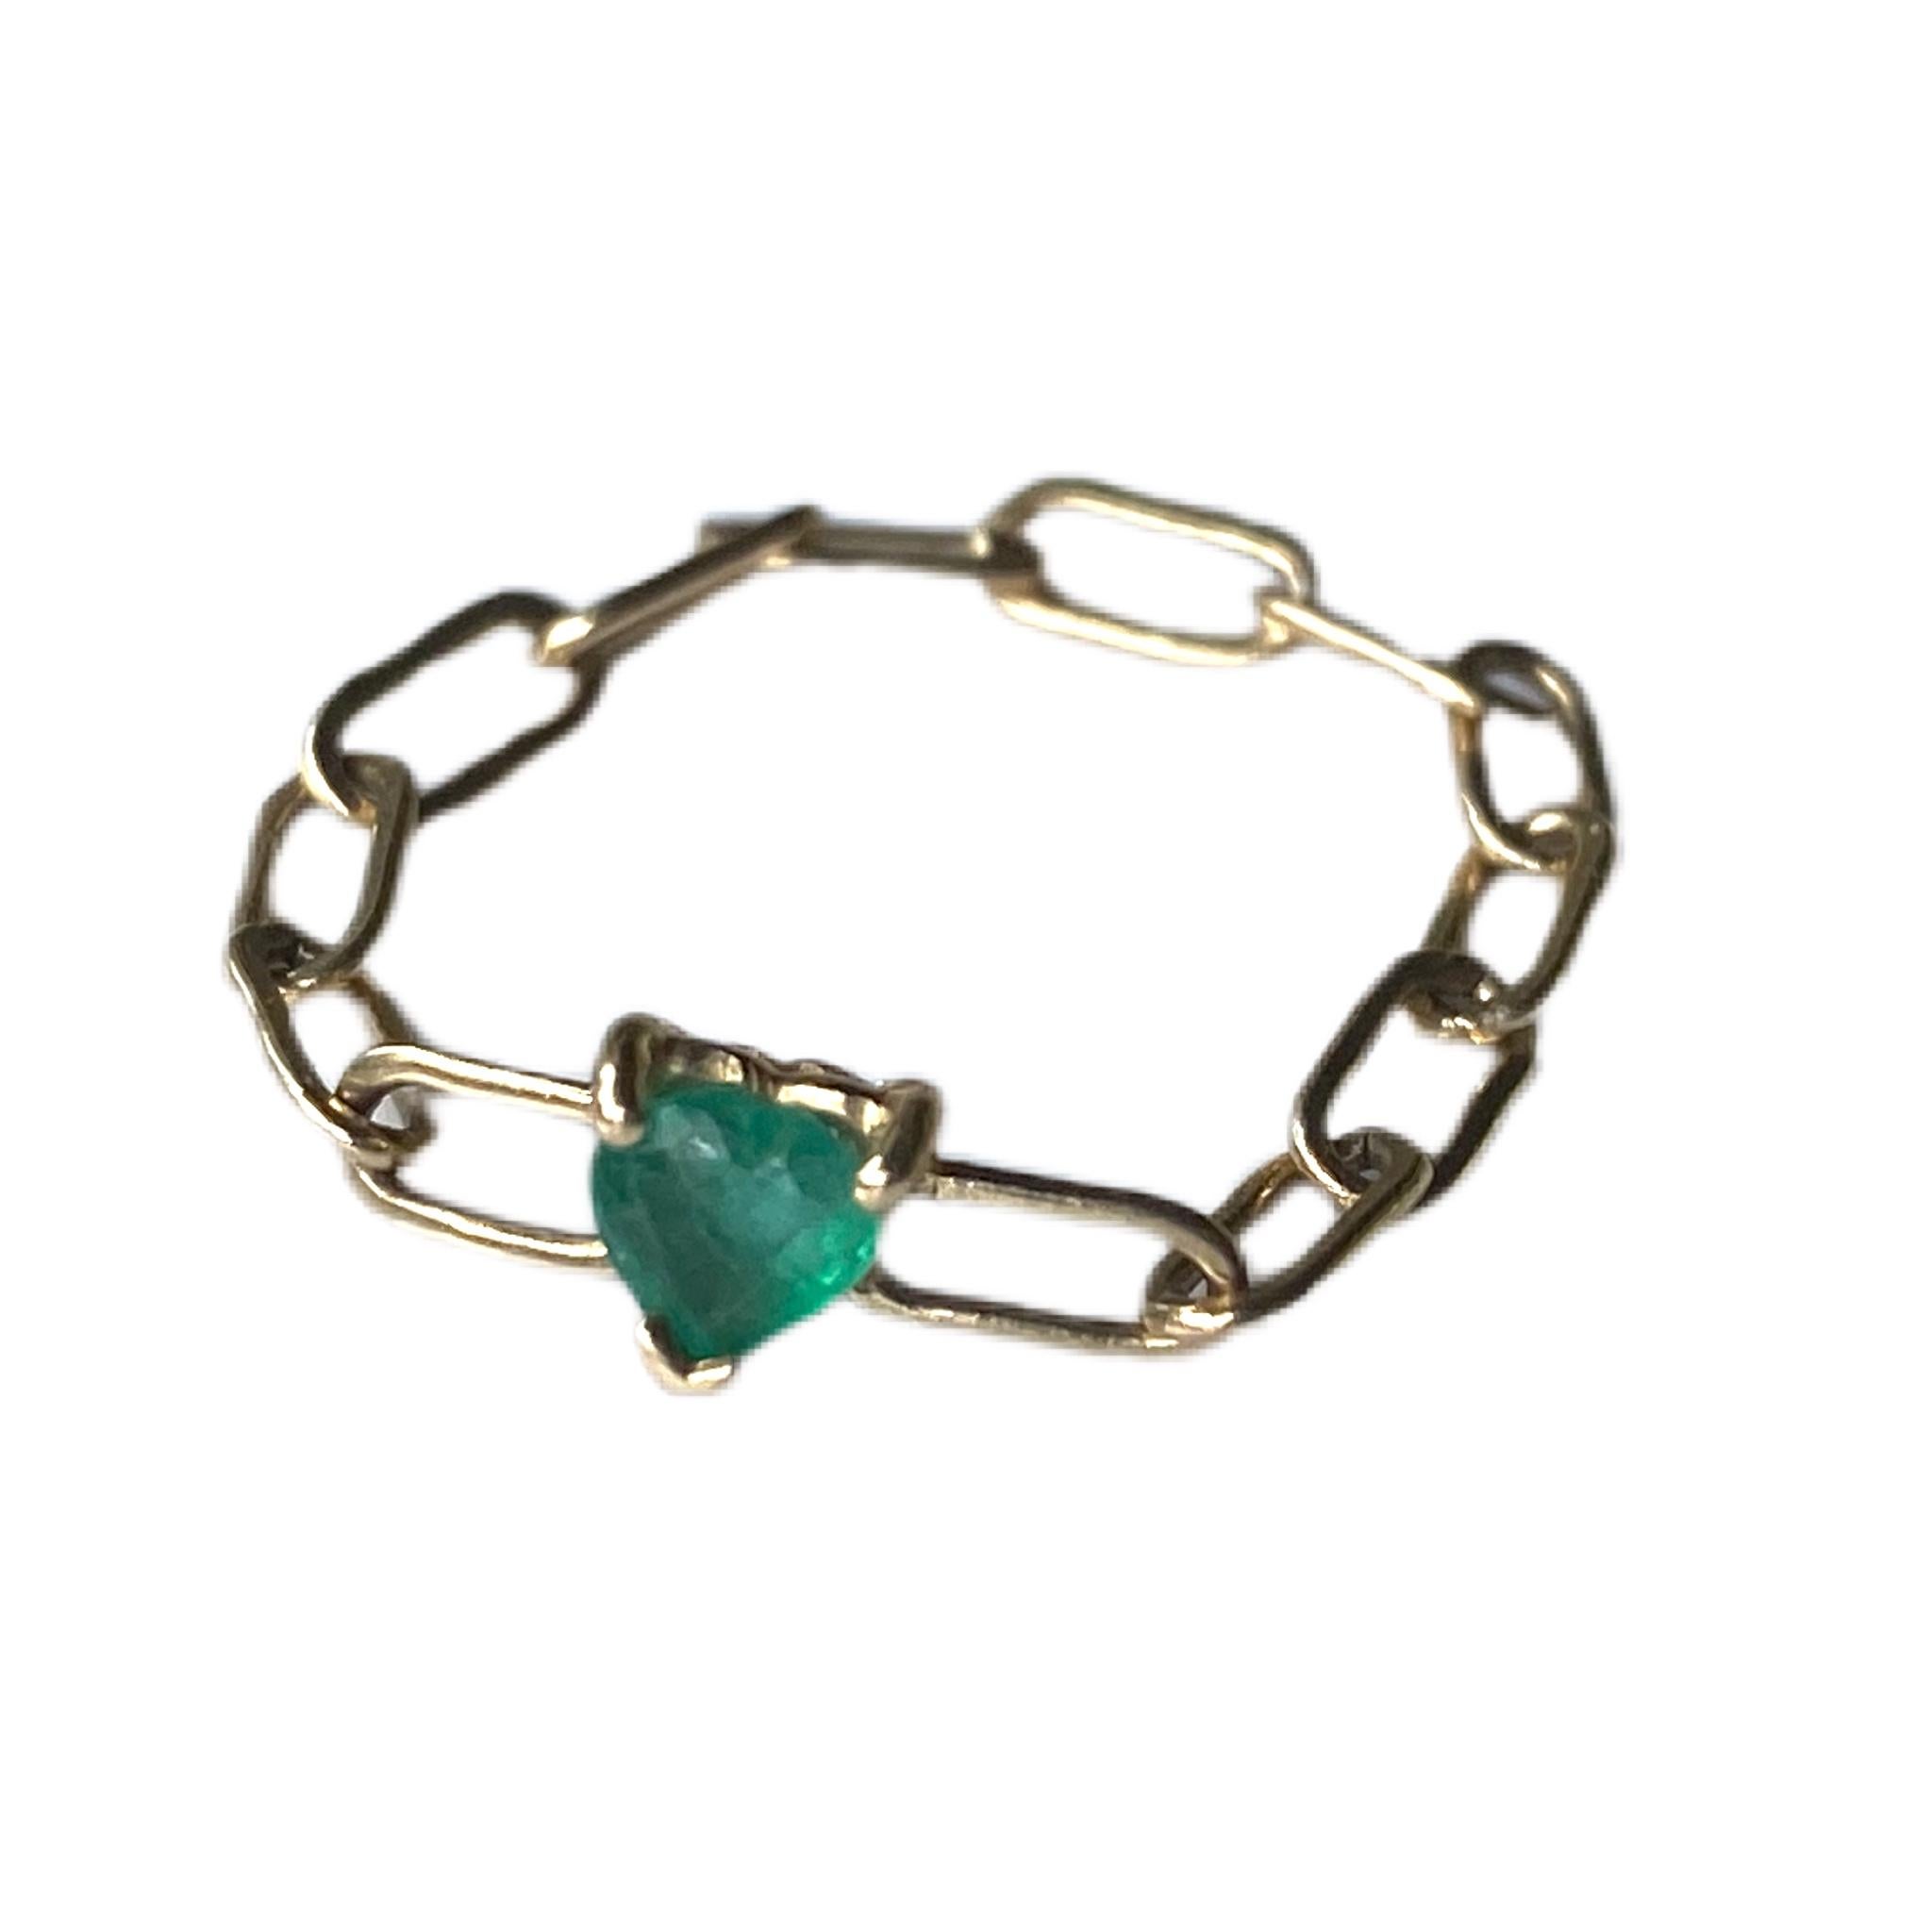 Heart Emerald Ring 14K Gold Chain J Dauphin

Made in Los Angeles

Last two images show same style with different gems, tanzanite and Opal.

Available for immediate delivery